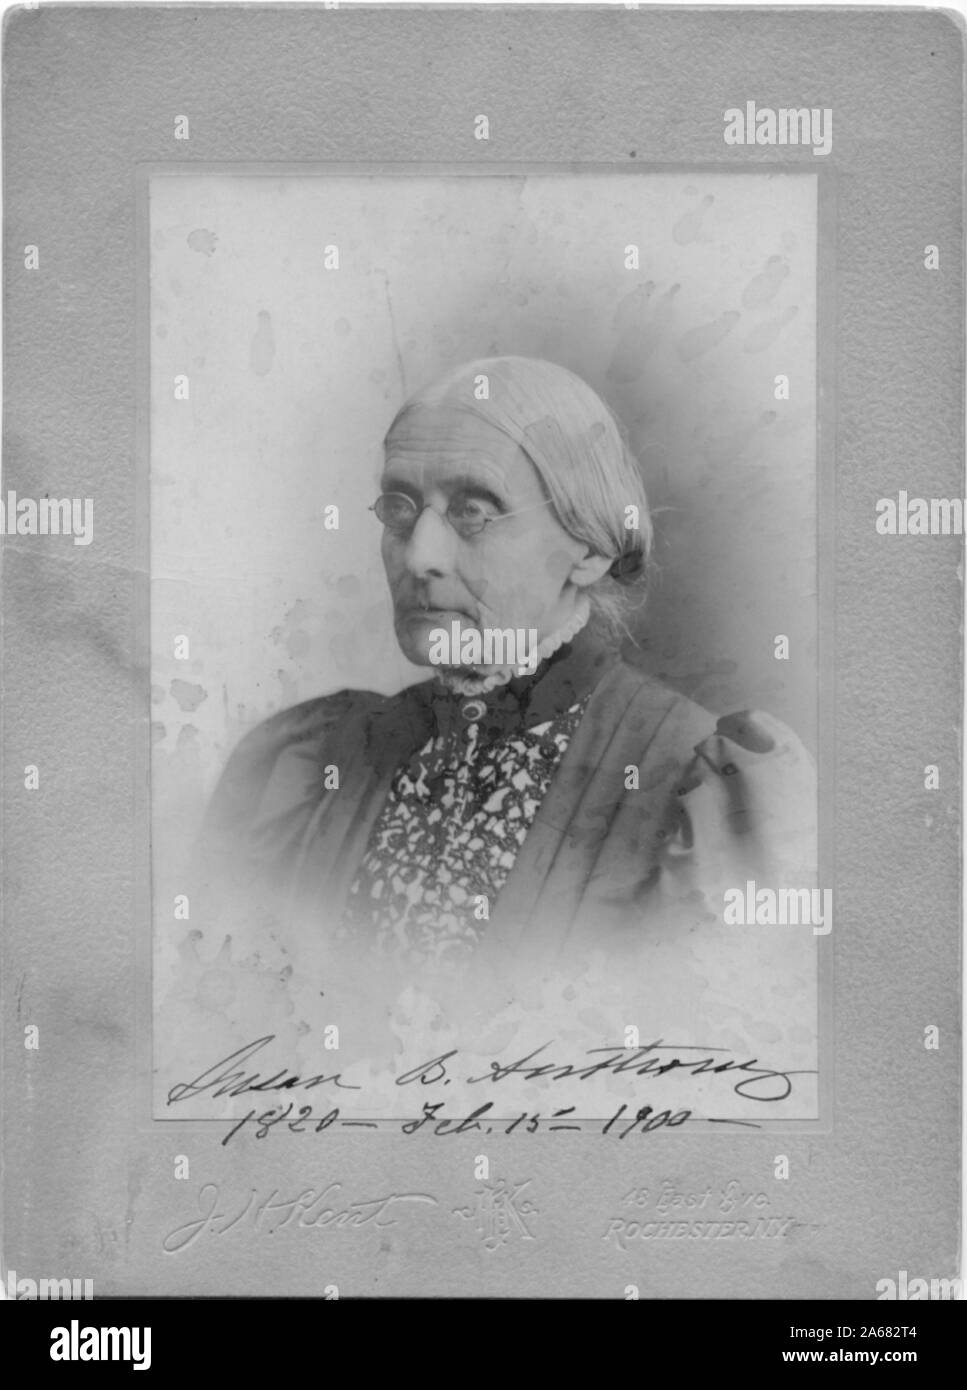 Signed photograph with a three-quarter-profile portrait shot of American social reformer and suffragist Susan B Anthony, developed by JH Kent studio, Rochester, New York, February 15, 1900. () Stock Photo